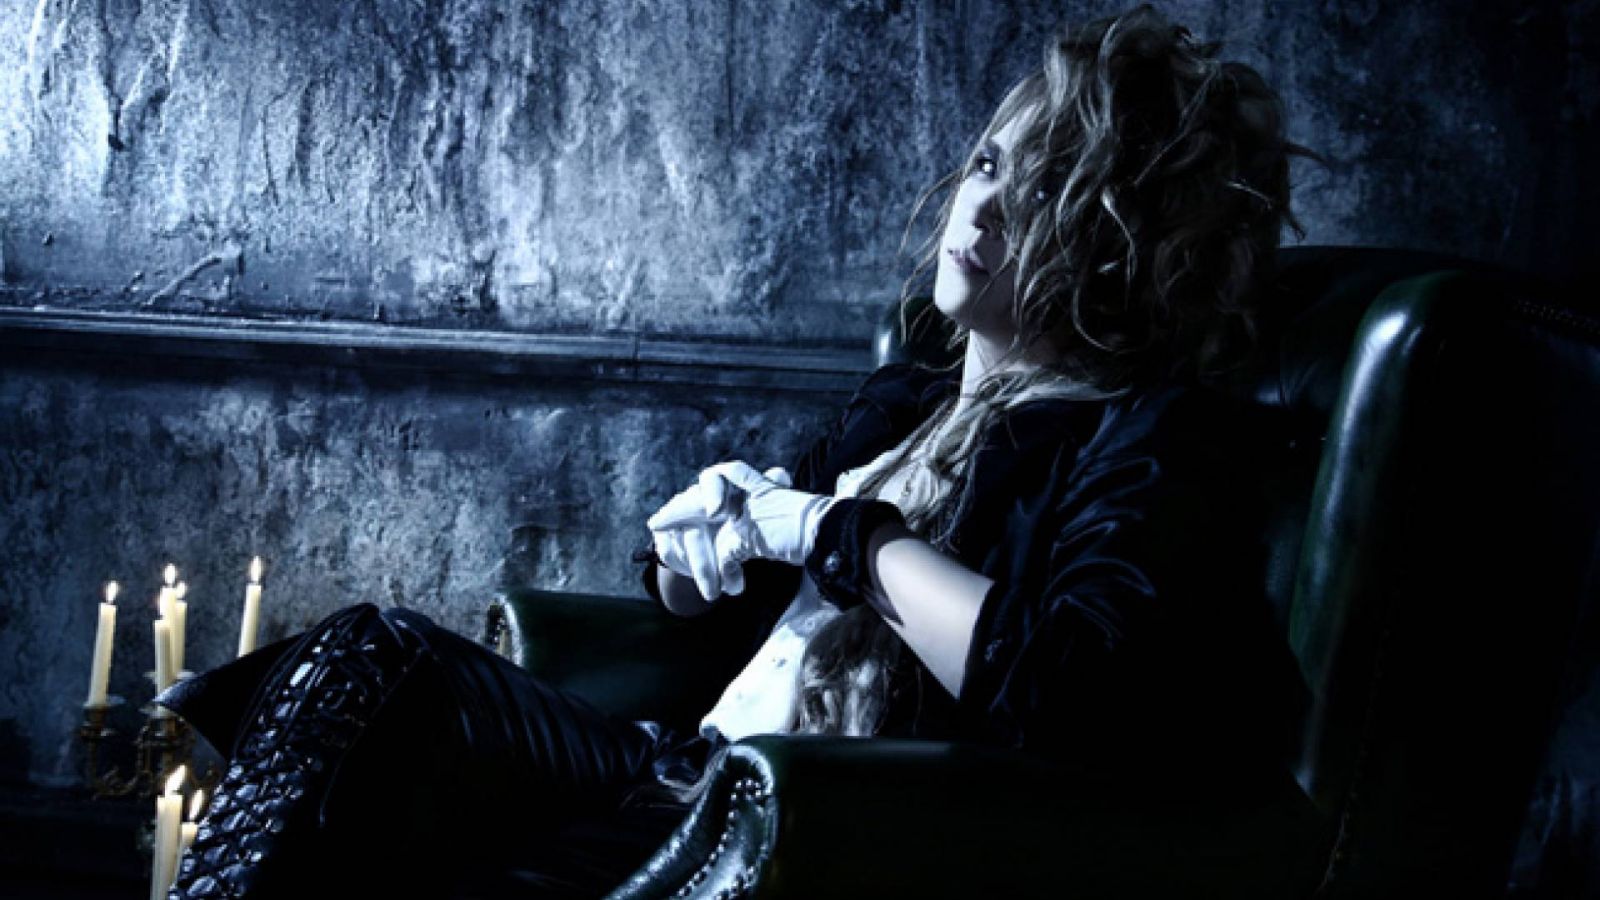 News from KAMIJO © CHATEAU AGENCY. All rights reserved.